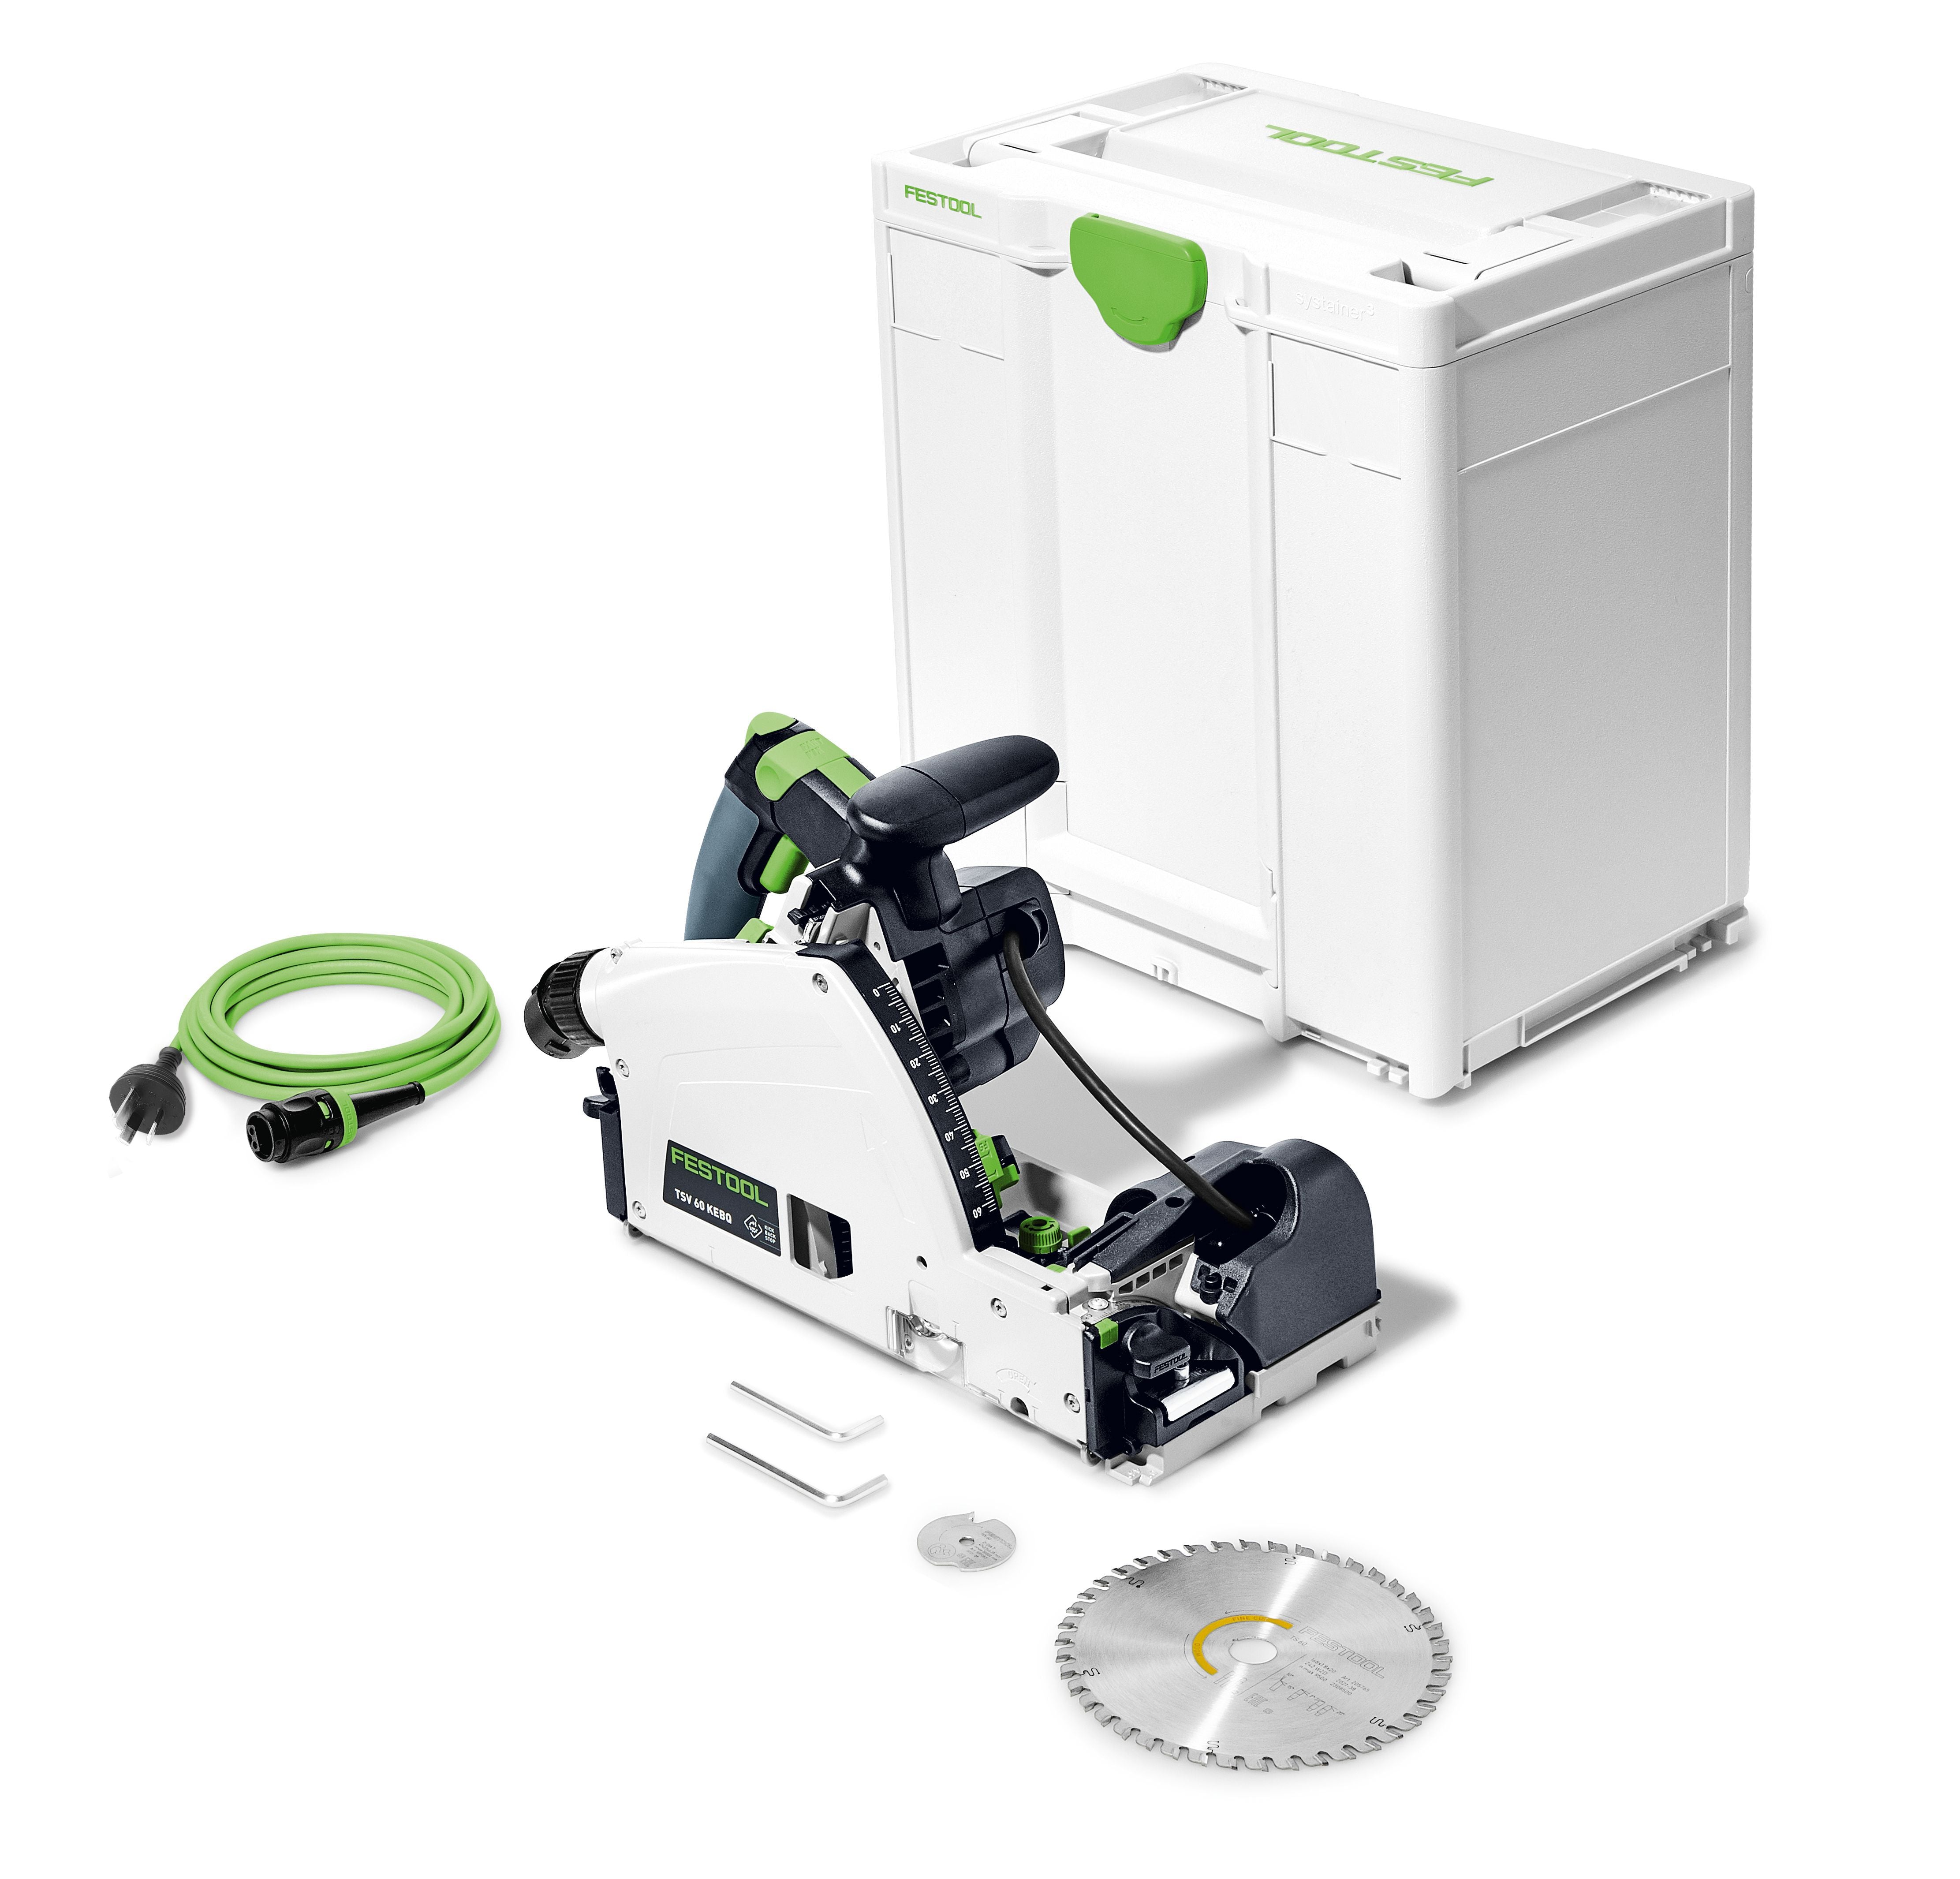 TSV 60k 168mm Plunge Cut Scoring Saw in Systainer 576732 by Festool